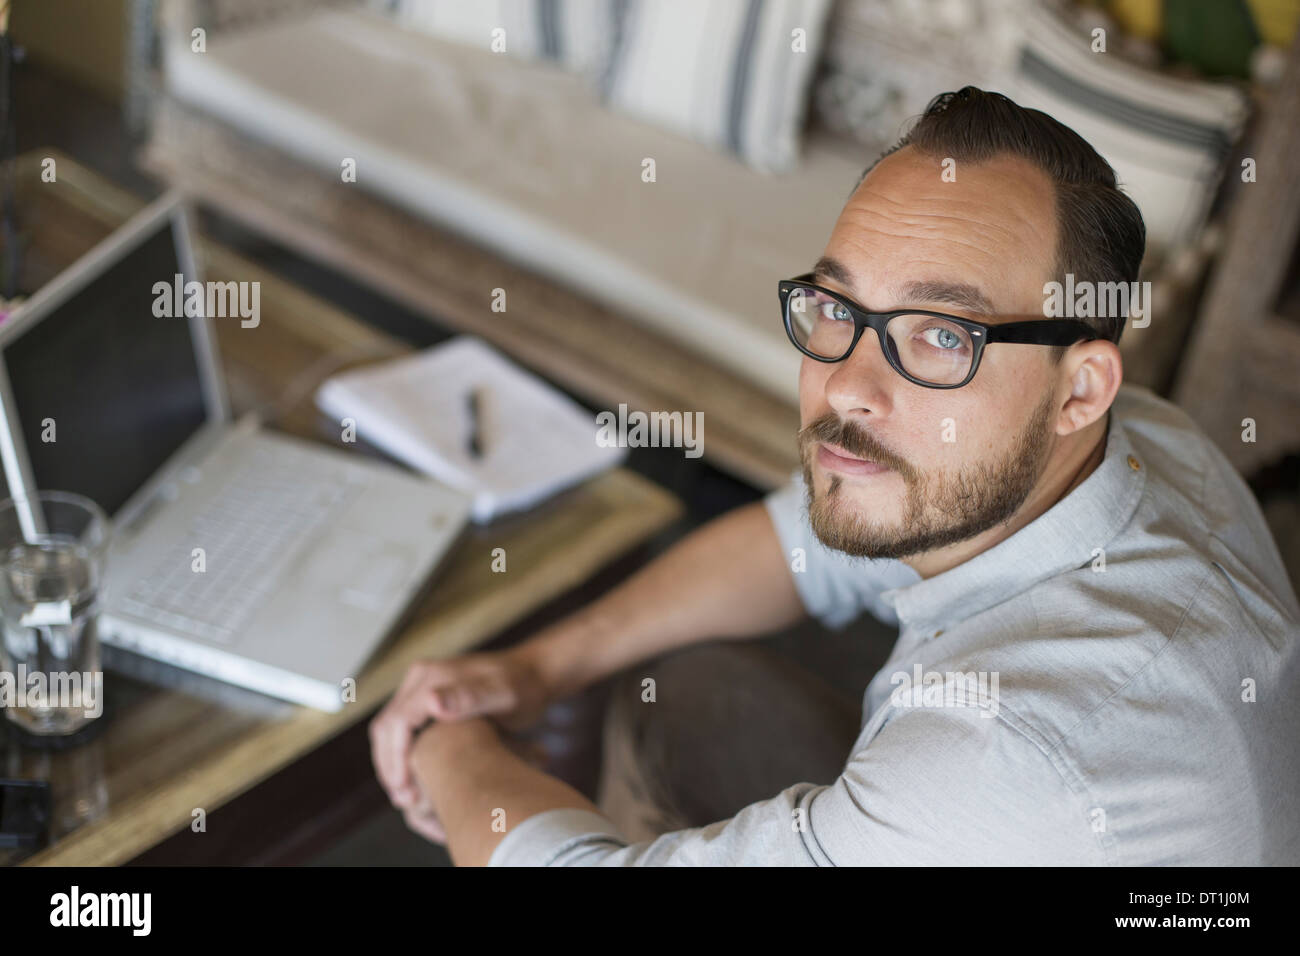 A man sitting at a desk using a laptop computer Running a small business Stock Photo